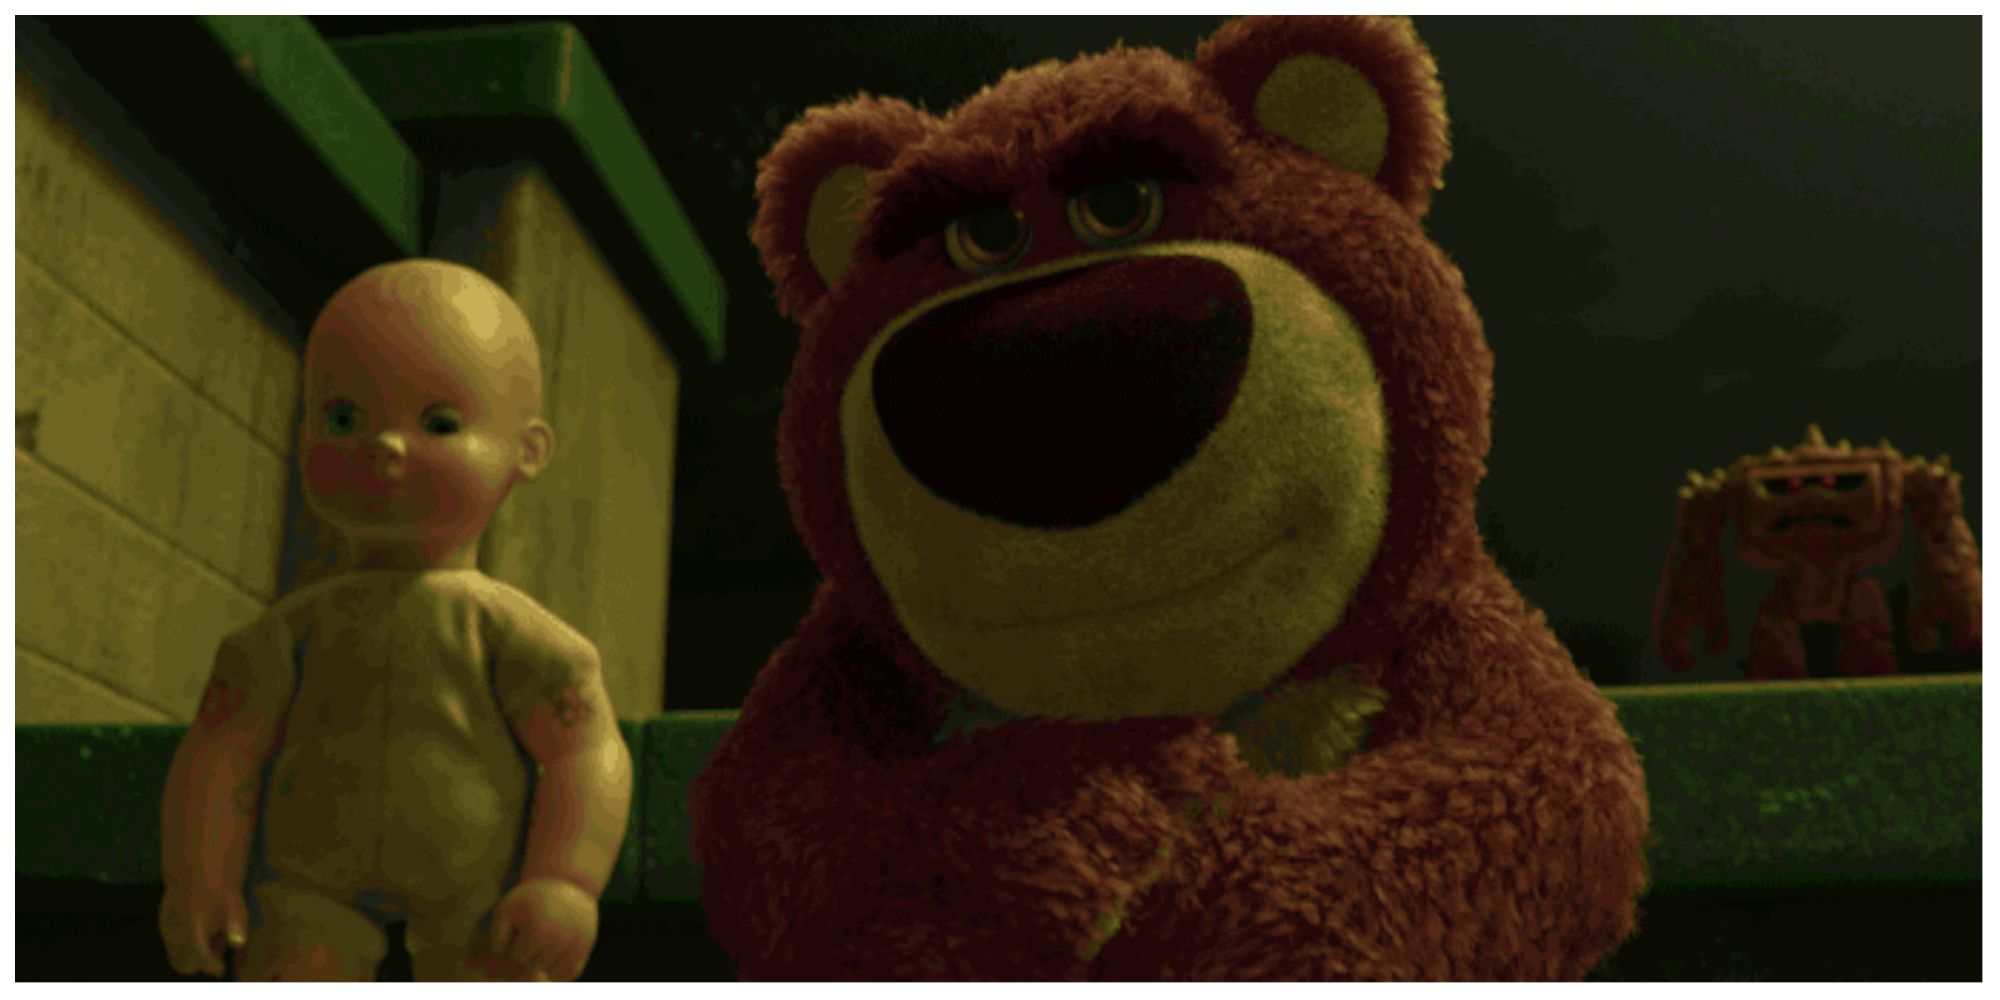 Lotso and Big Baby the villains of Toy Story 3